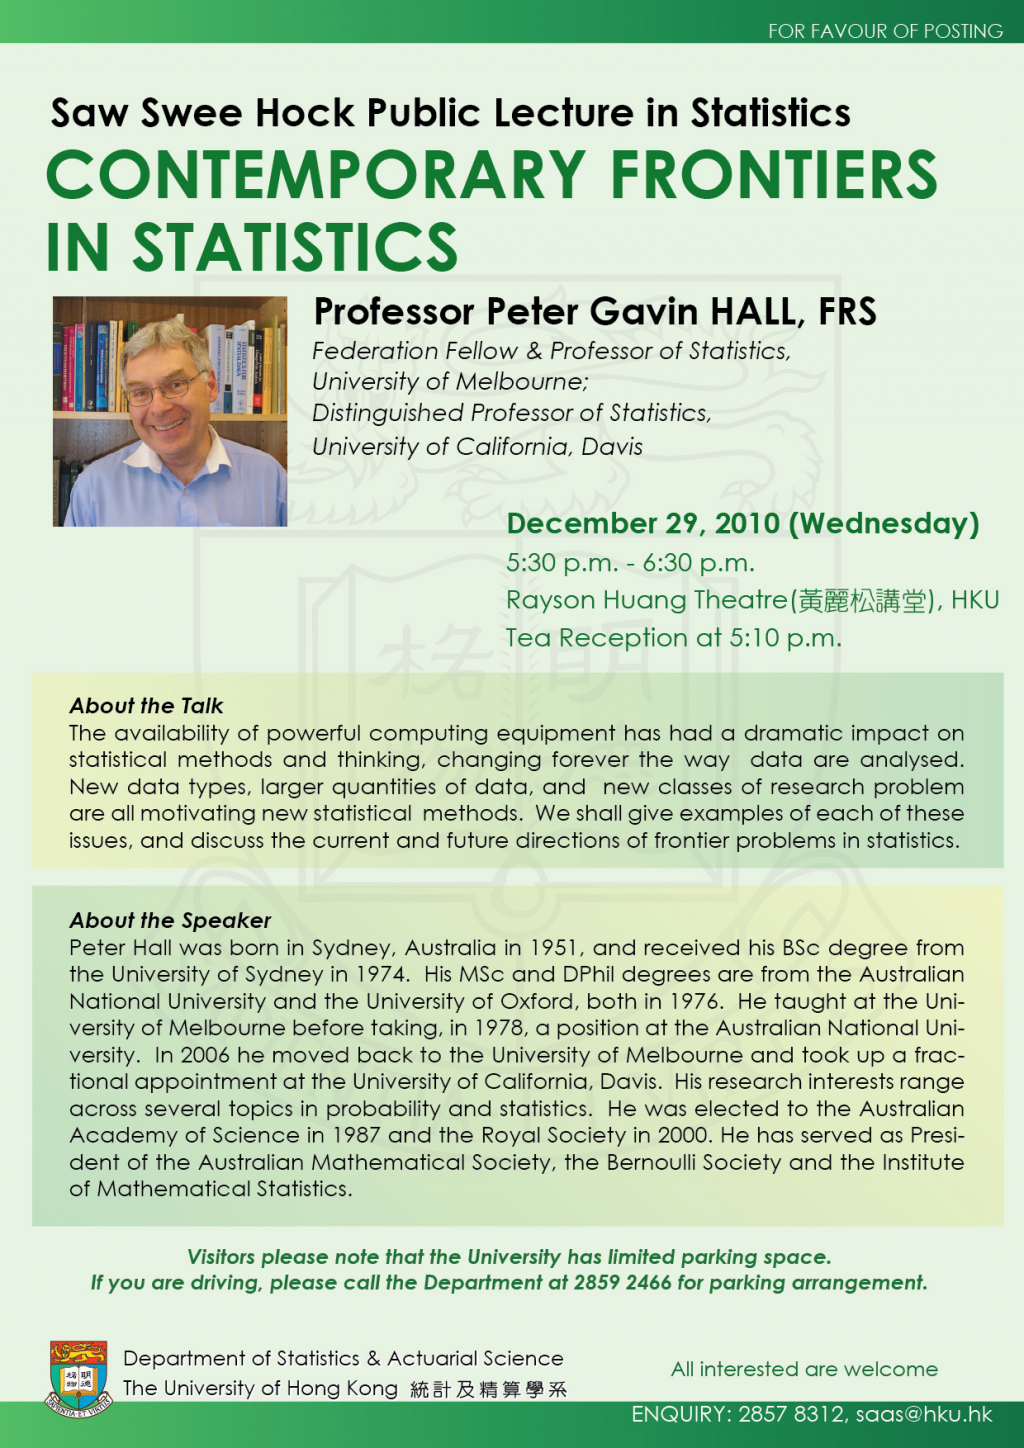 Saw Swee Hock Public Lecture in Statistics on 'Contemporary Frontiers in Statistics' by Professor Peter Gavin HALL, FRS